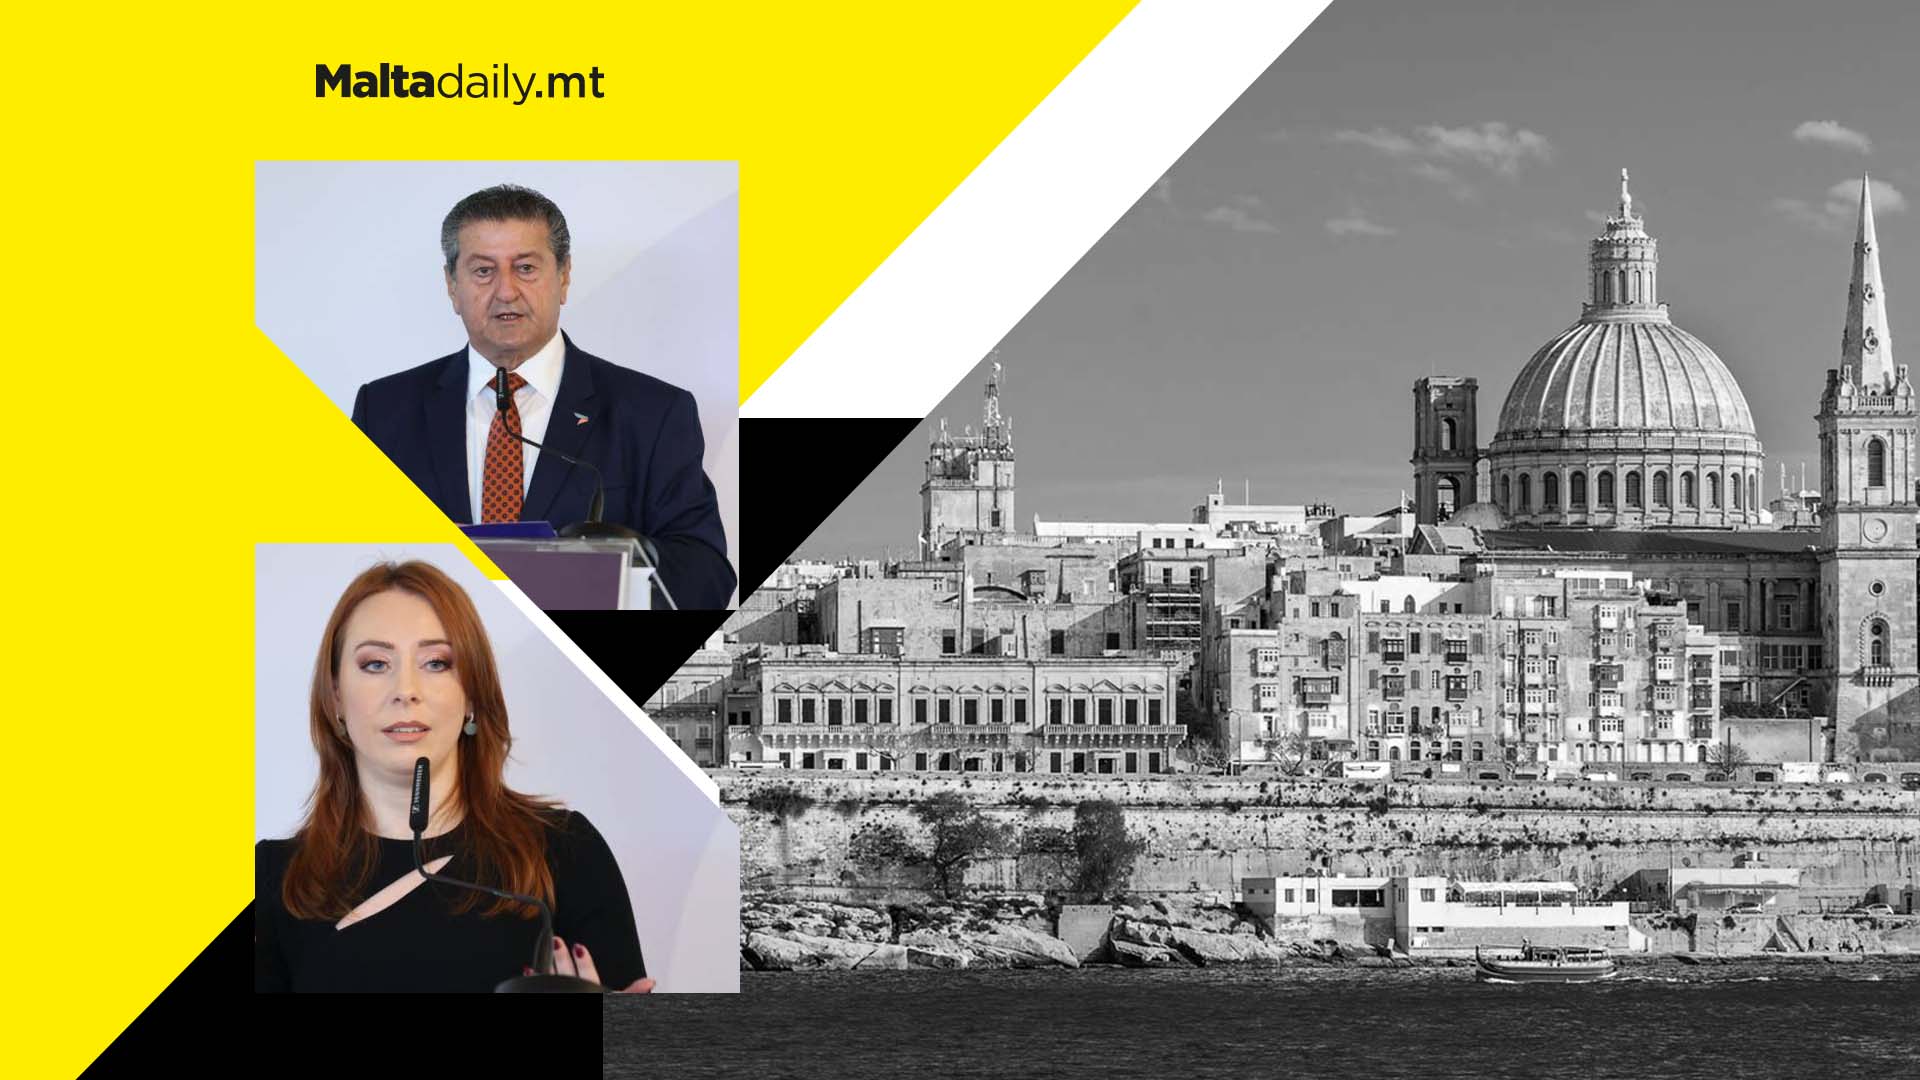 The grey-list’s effects will remain well after Malta exits it says SMEs President